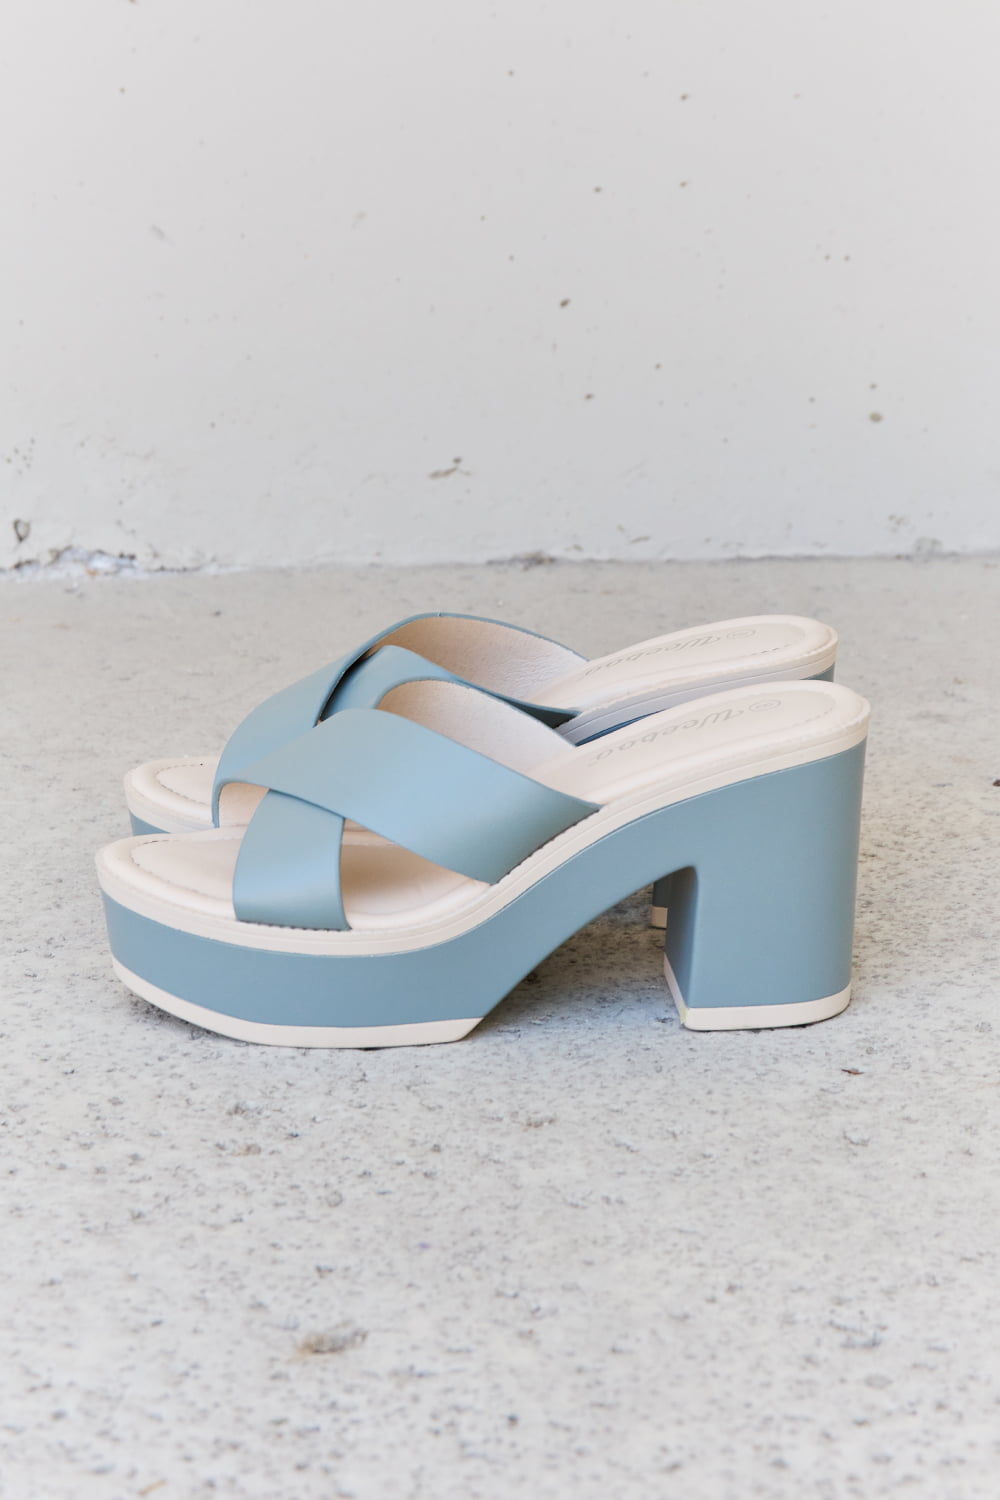 Weeboo Cherish The Moments Contrast Platform Sandals in Misty Blue - Thandynie